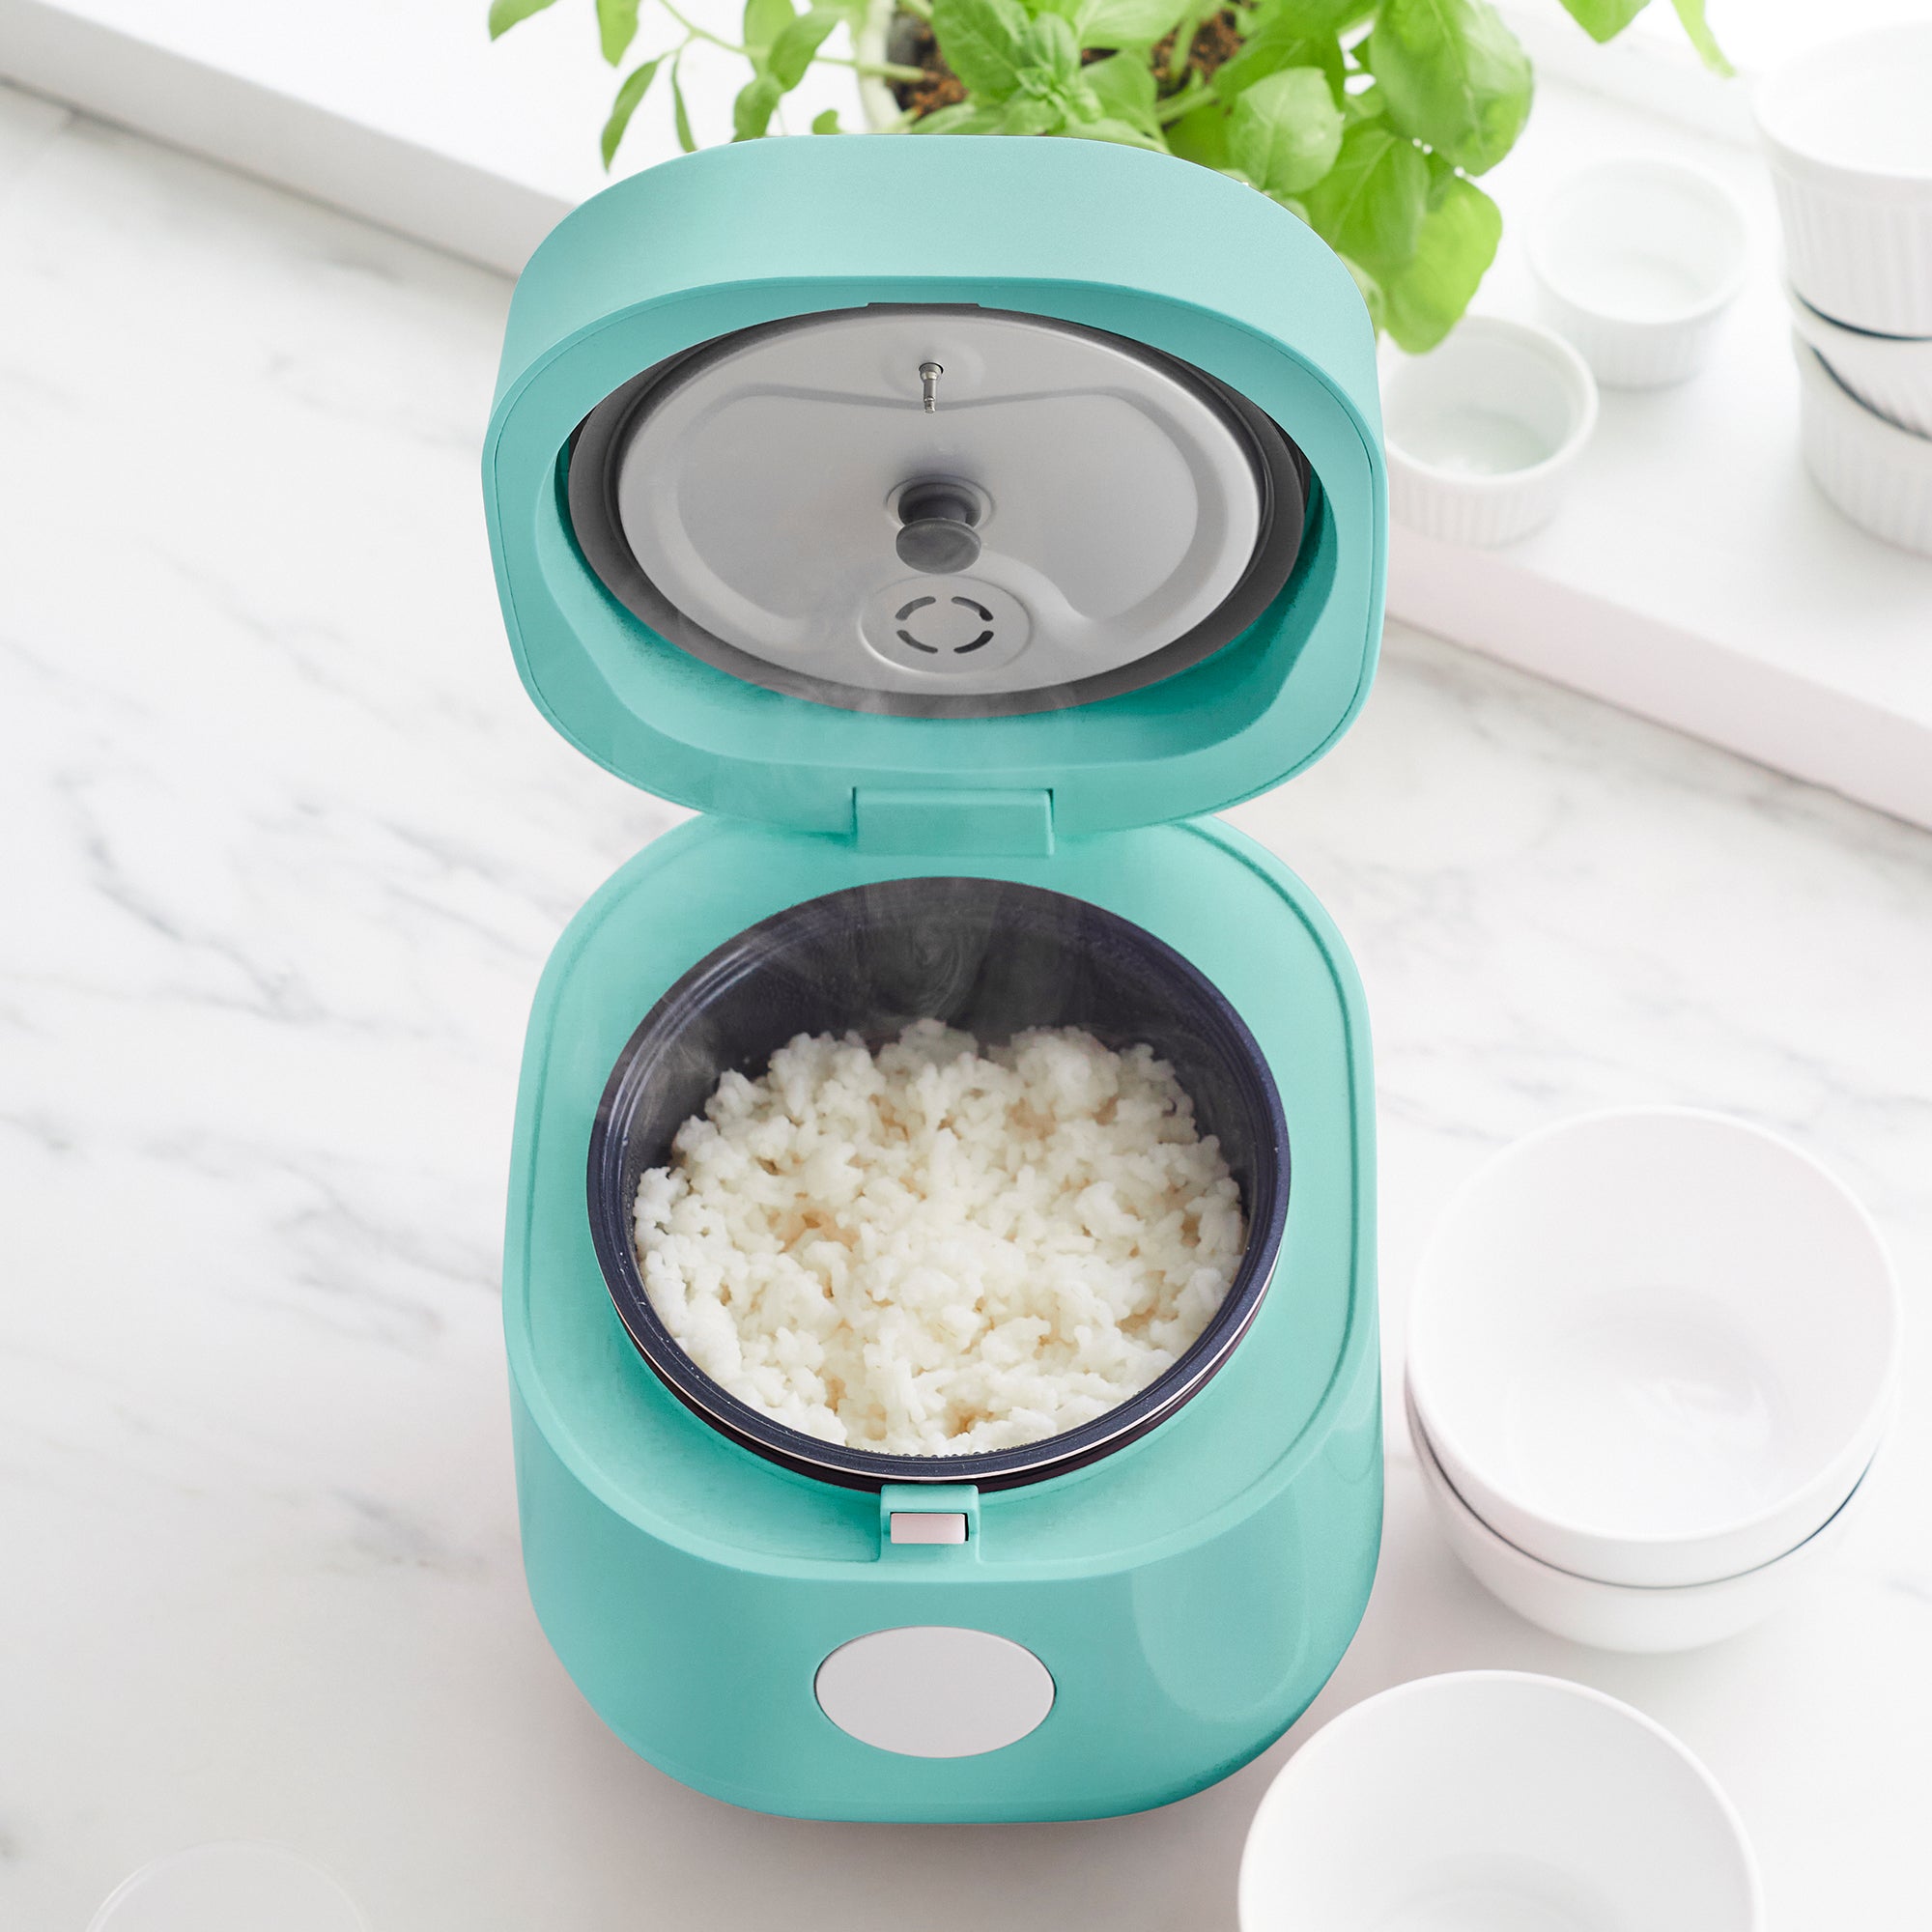 The Ultimate GreenLife Rice Cooker Review - Trusted Cookware